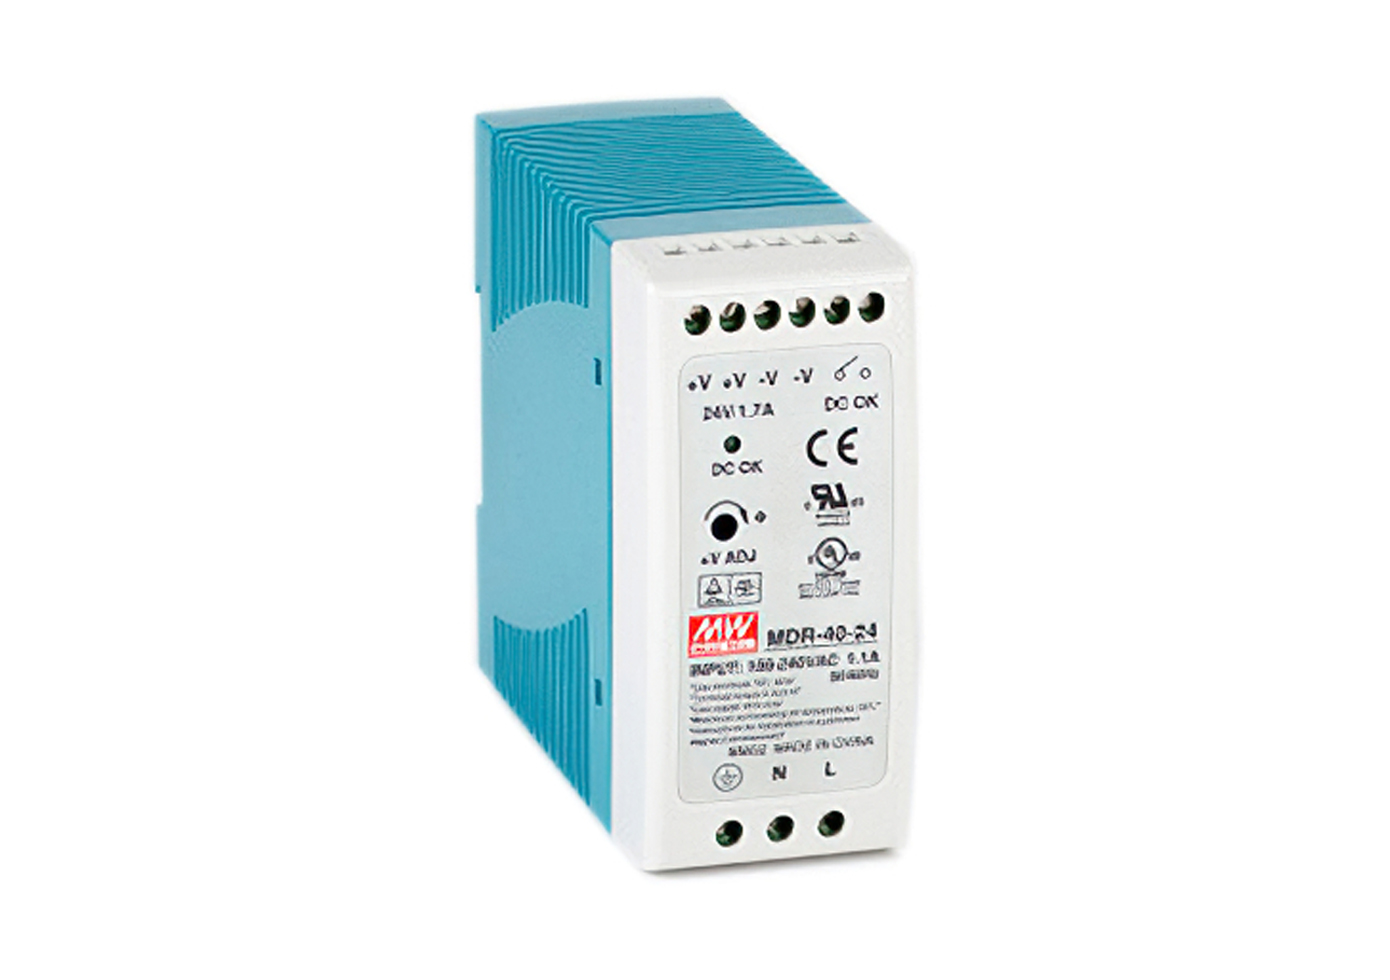 Power Supply, Single Output, DIN Rail, 24VDC, 1.7A<br/>

<span class="clsSpnProdMdls">For all products, except Industrial PC</span>